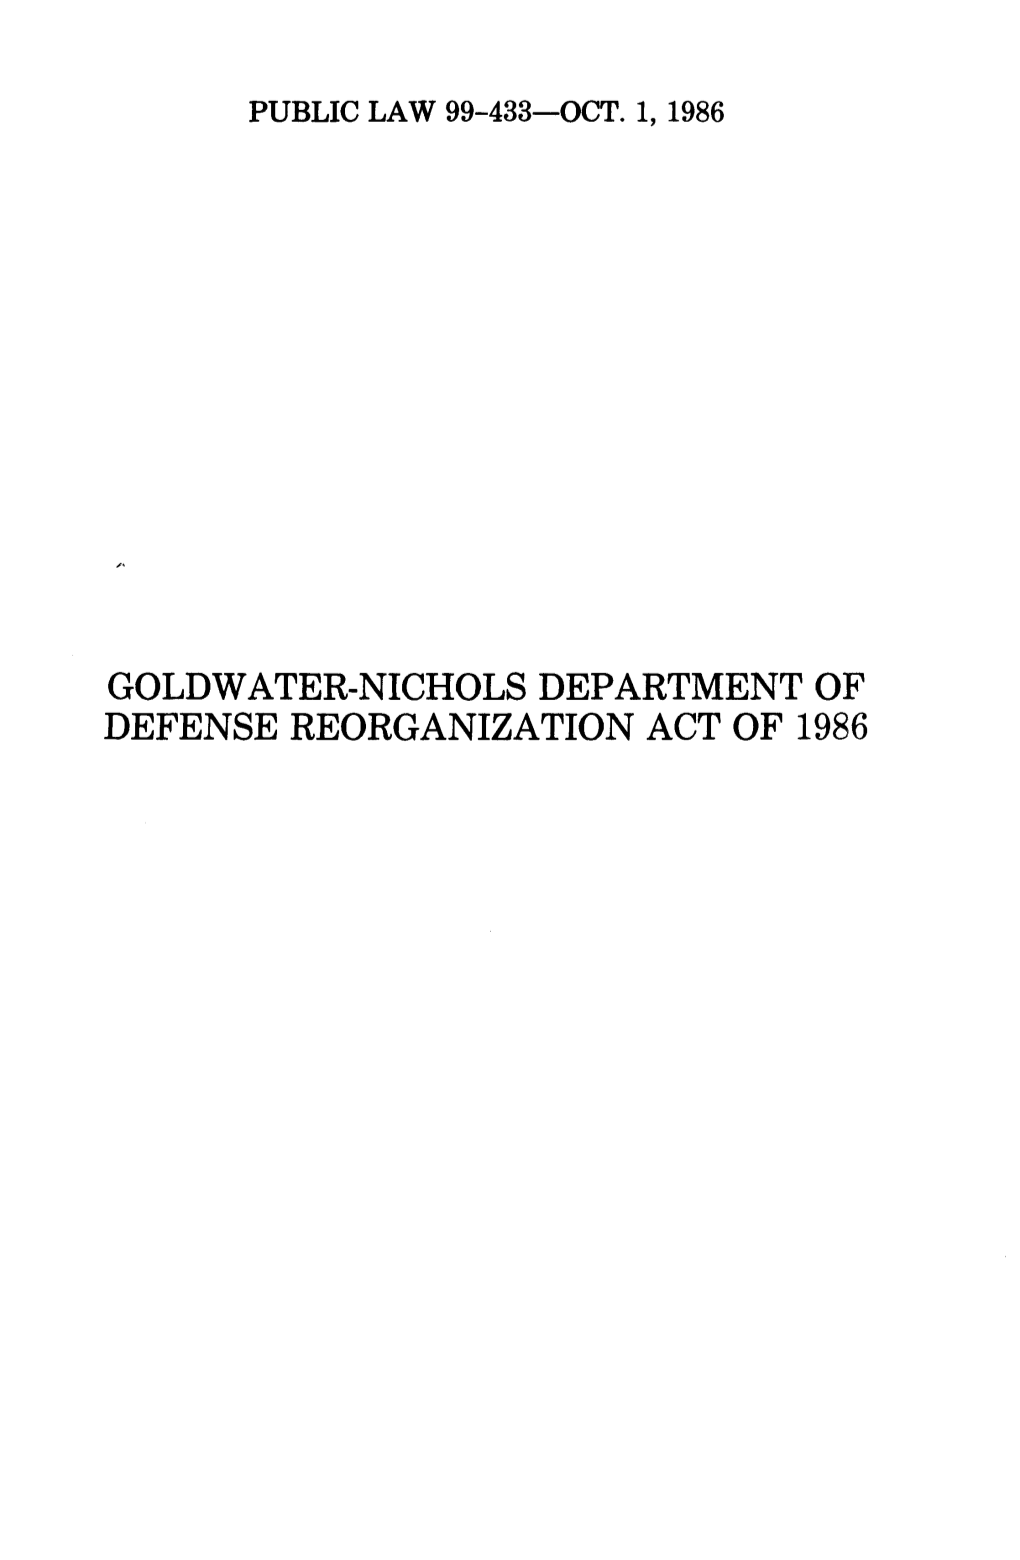 Goldwater-Nichols Department of Defense Reorganization Act of 1986 100 Stat